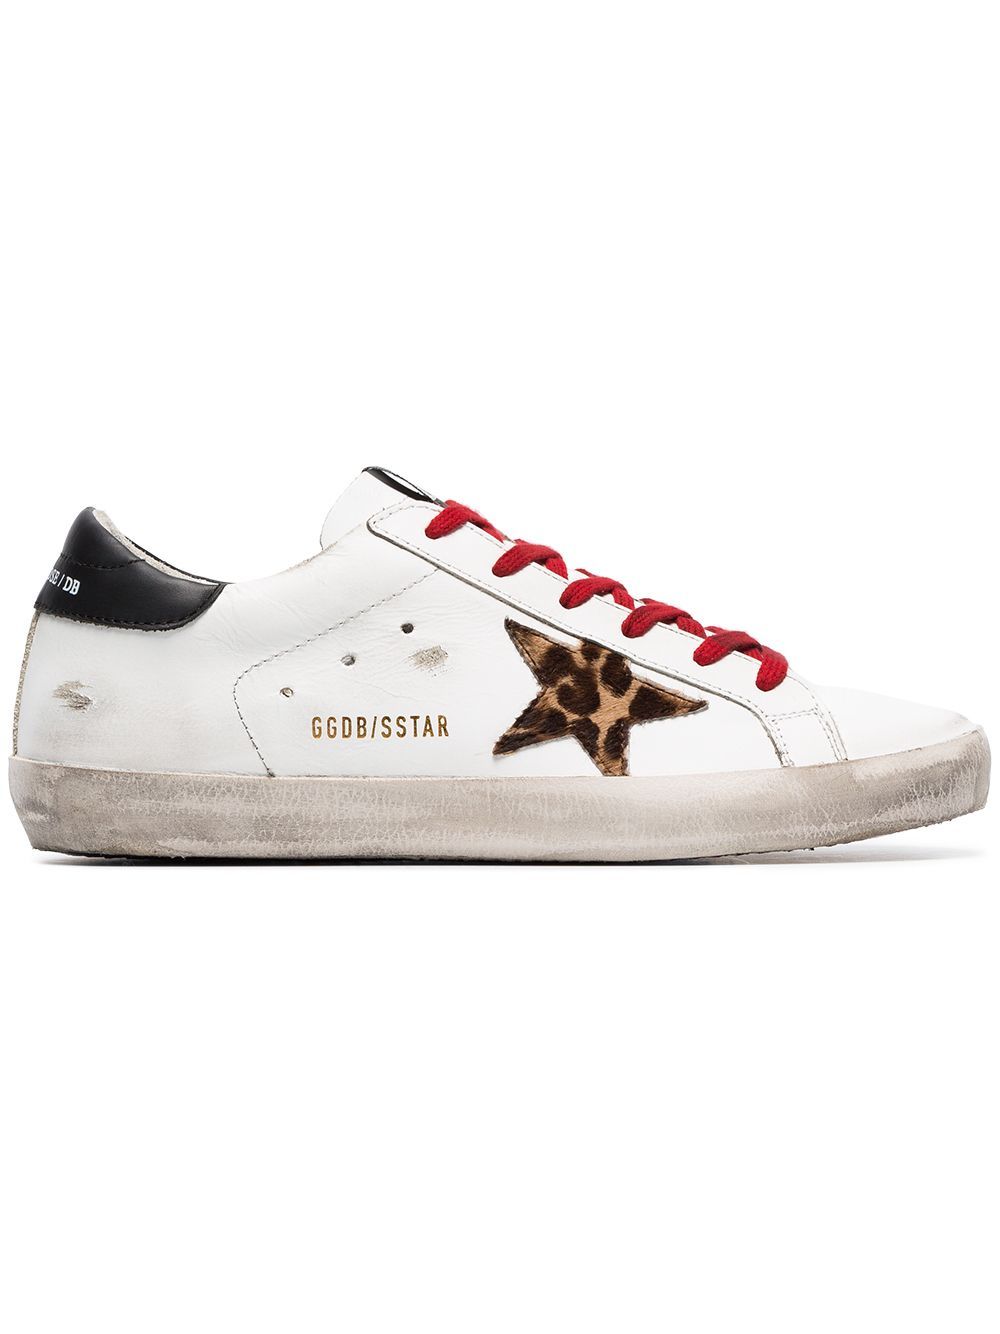 Golden Goose Deluxe Brand white Superstar leather sneakers | FarFetch Global